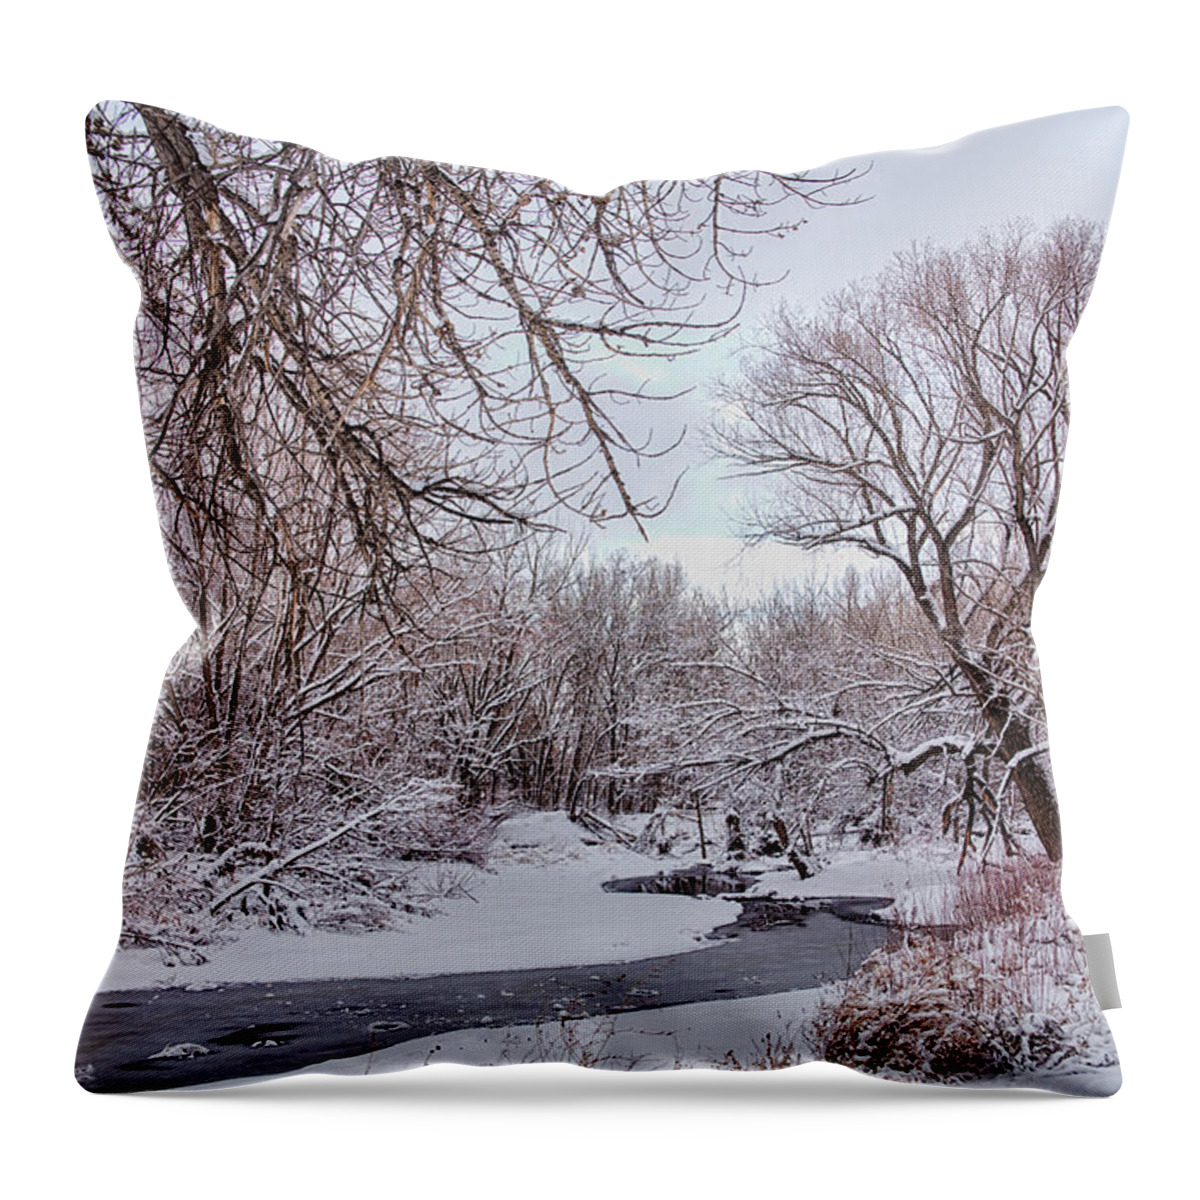 Winter Throw Pillow featuring the photograph Winter Creek by James BO Insogna